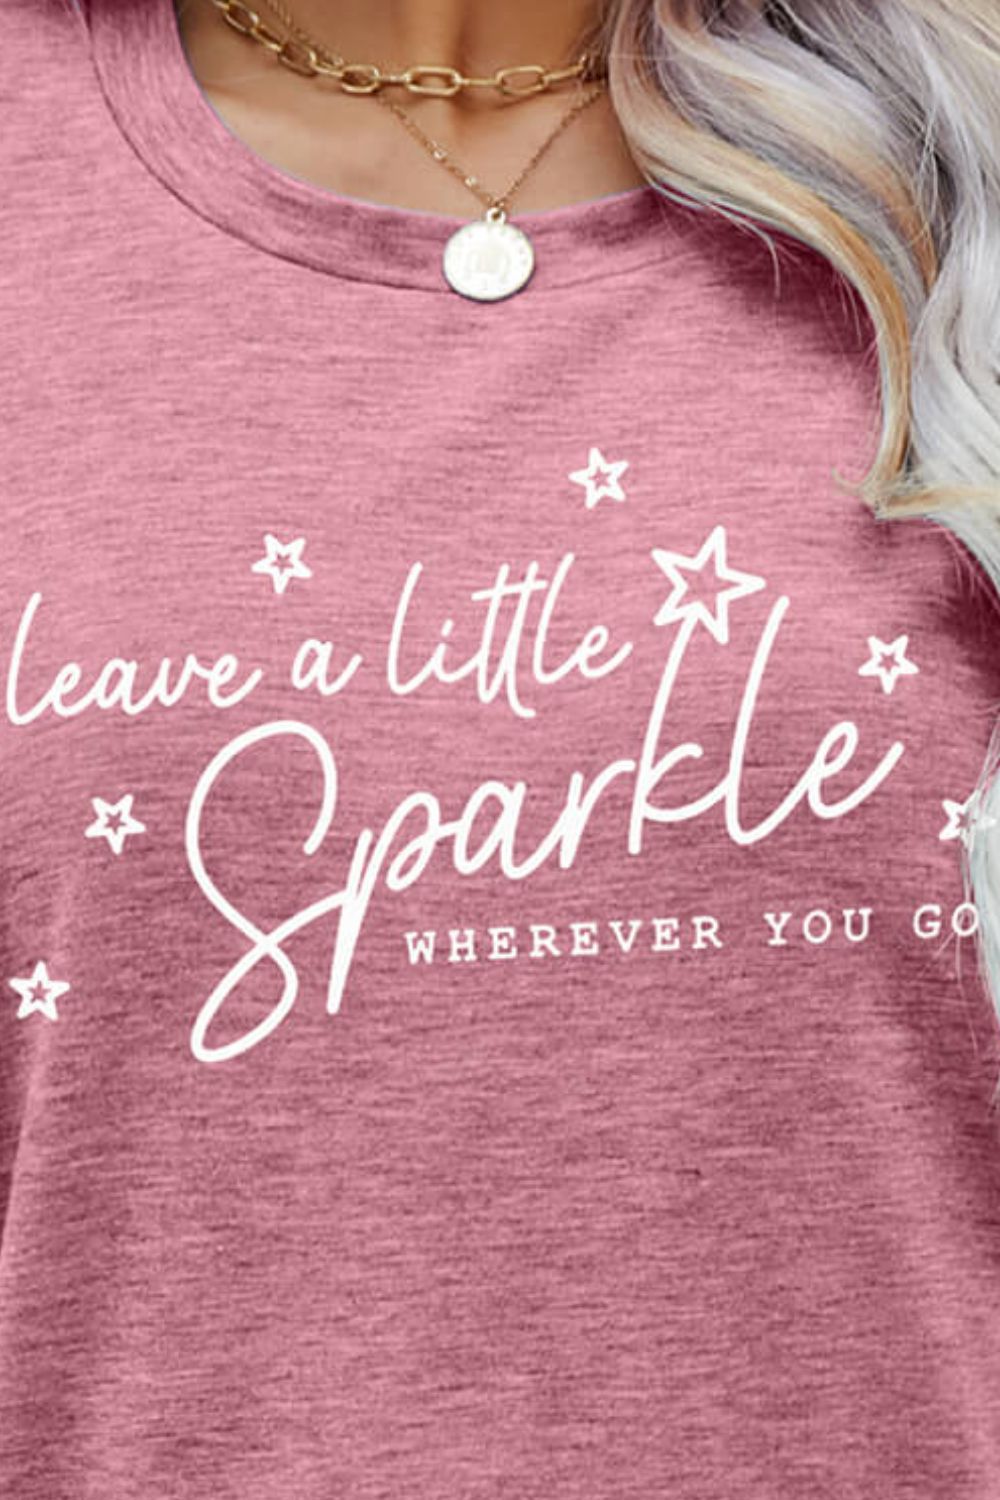 Ladies - T-Shirt - LEAVE A LITTLE SPARKLE WHEREVER YOU GO